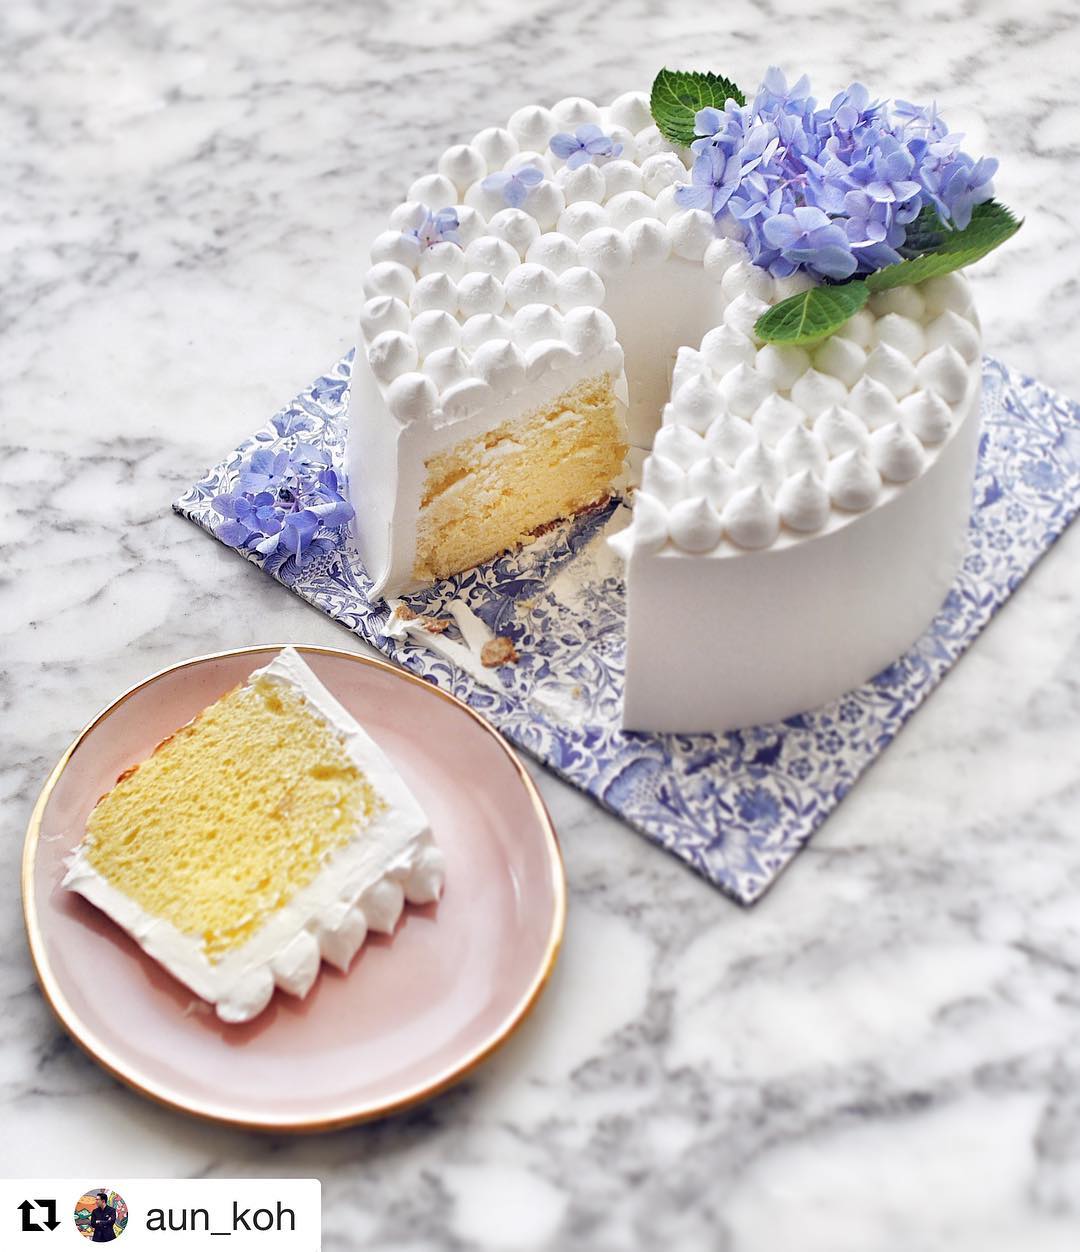 Yuzu chiffon cake – the one that set Ten Butter Fingers on its road to Instagram fame after Aun Koh and Tan Su-lyn, the couple behind the food blog, Chubby Hubby, raved about it.